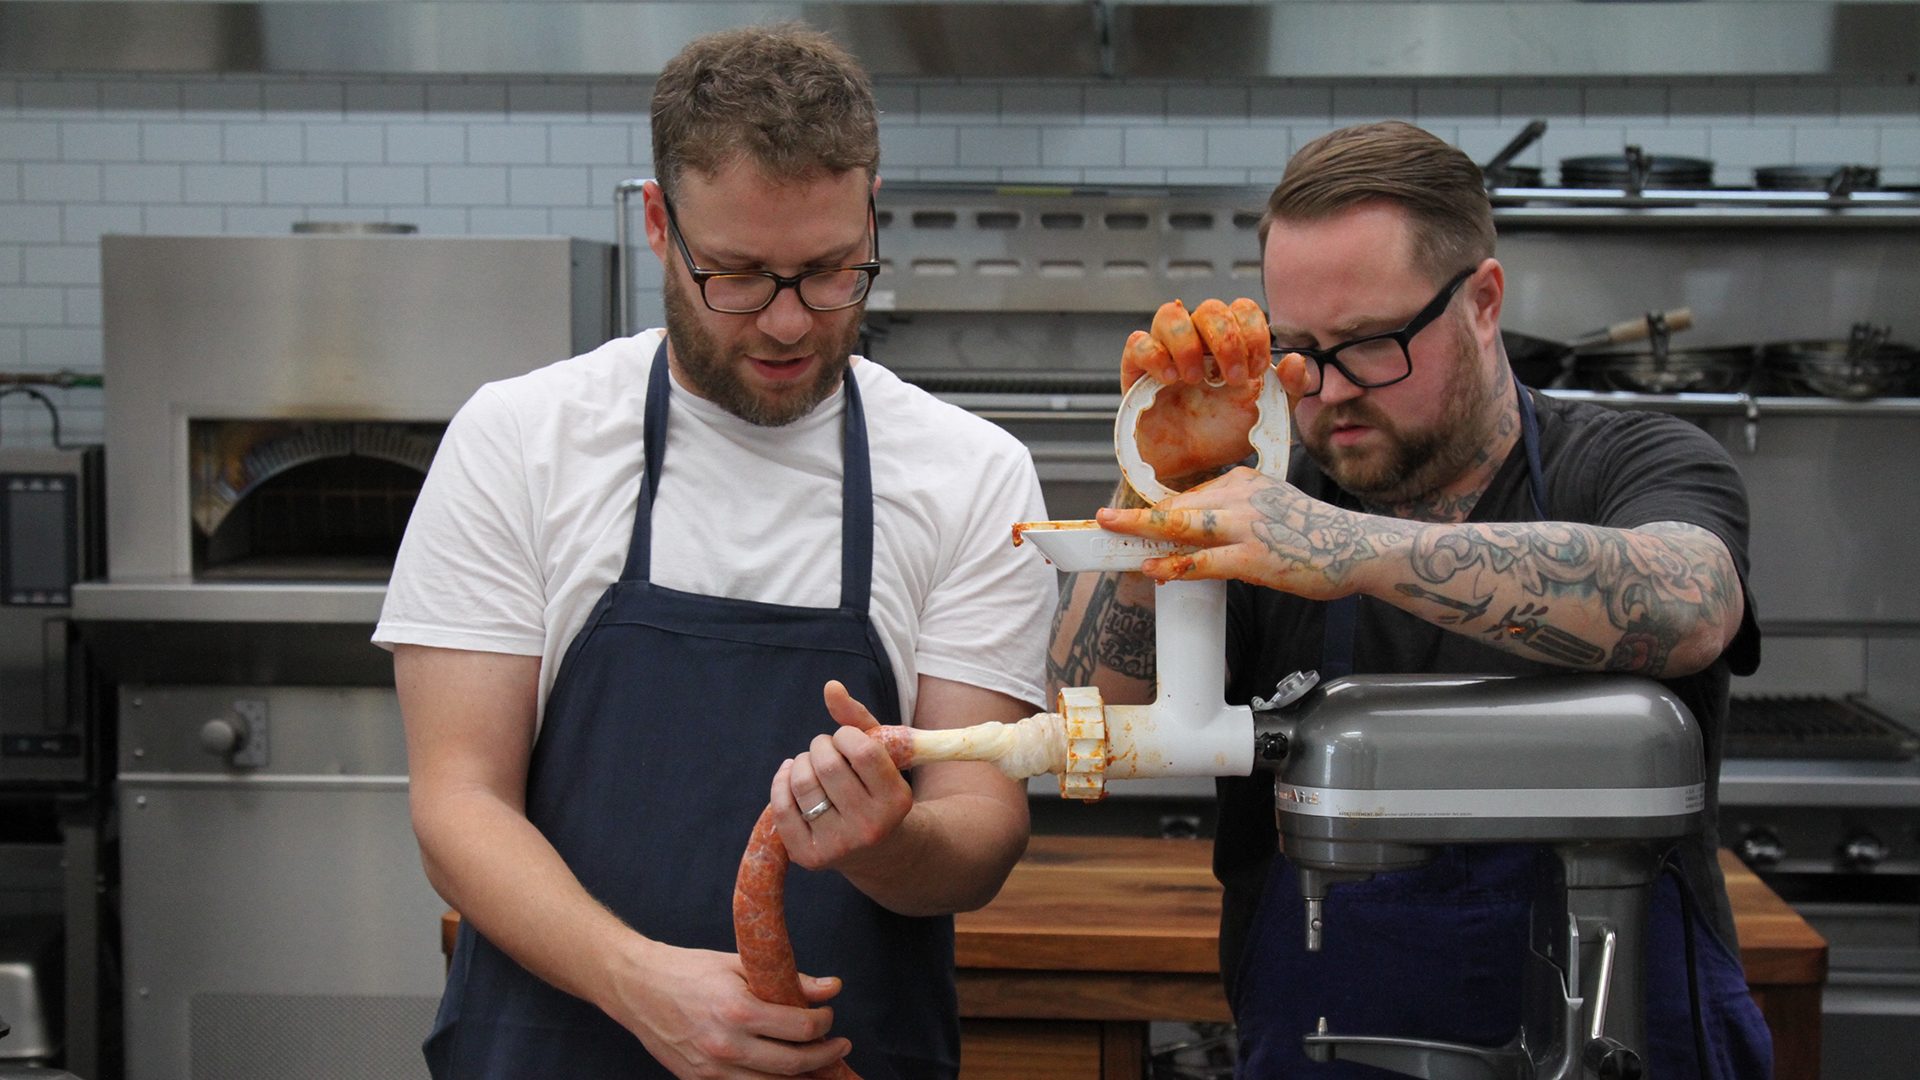 Make Sausage With Seth Rogen Vice Video Documentaries Films